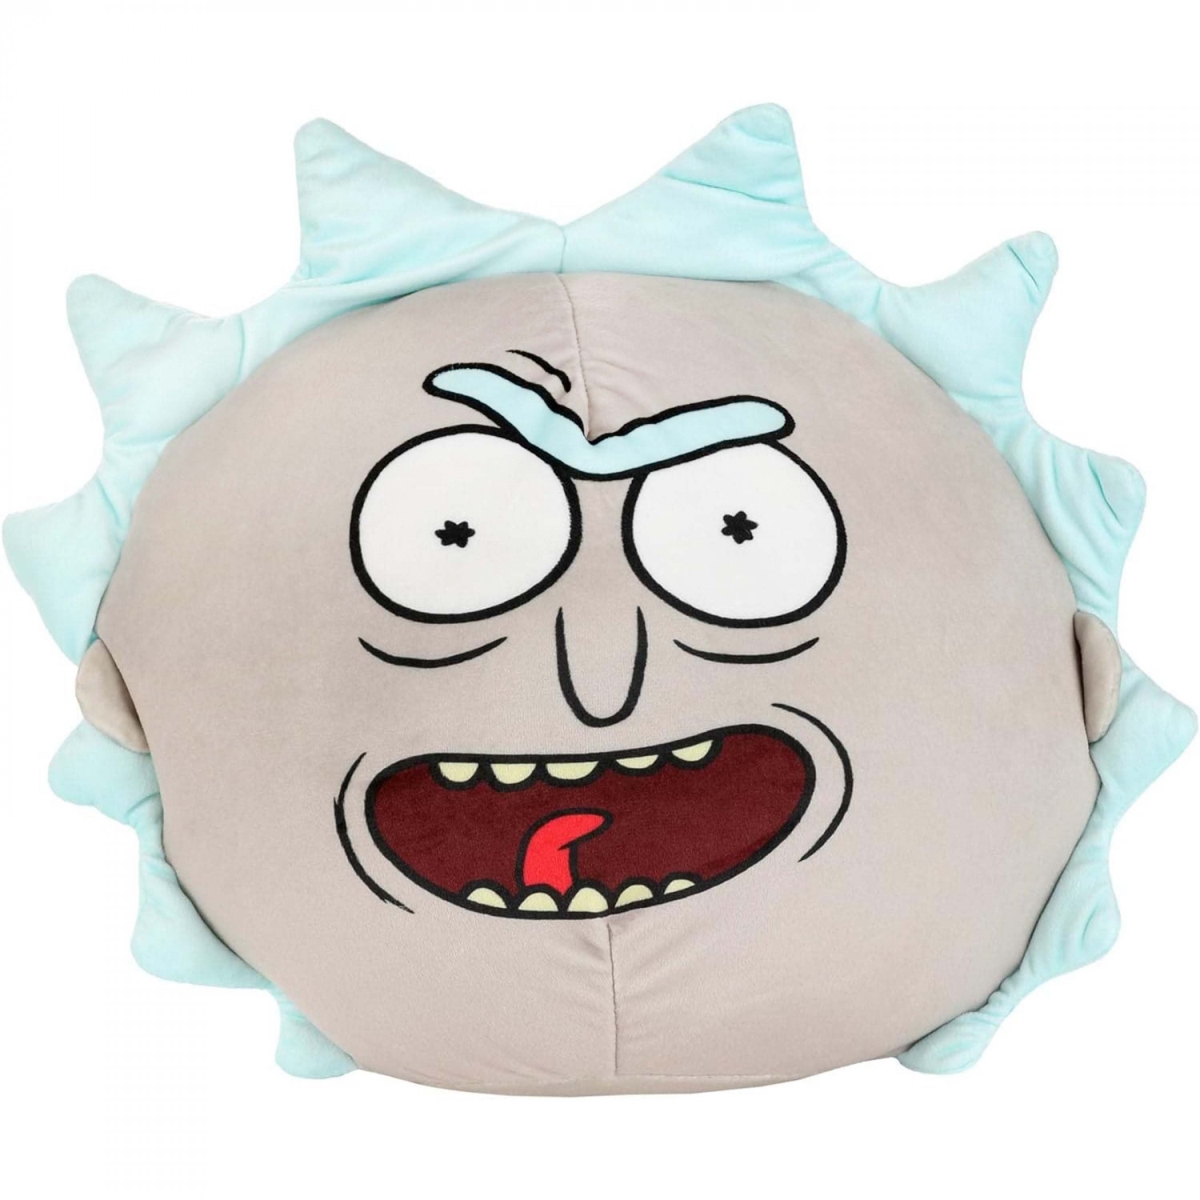 Picture of Rick & Morty 860826 11 in. Rick Sanchez Round Cloud Pillow